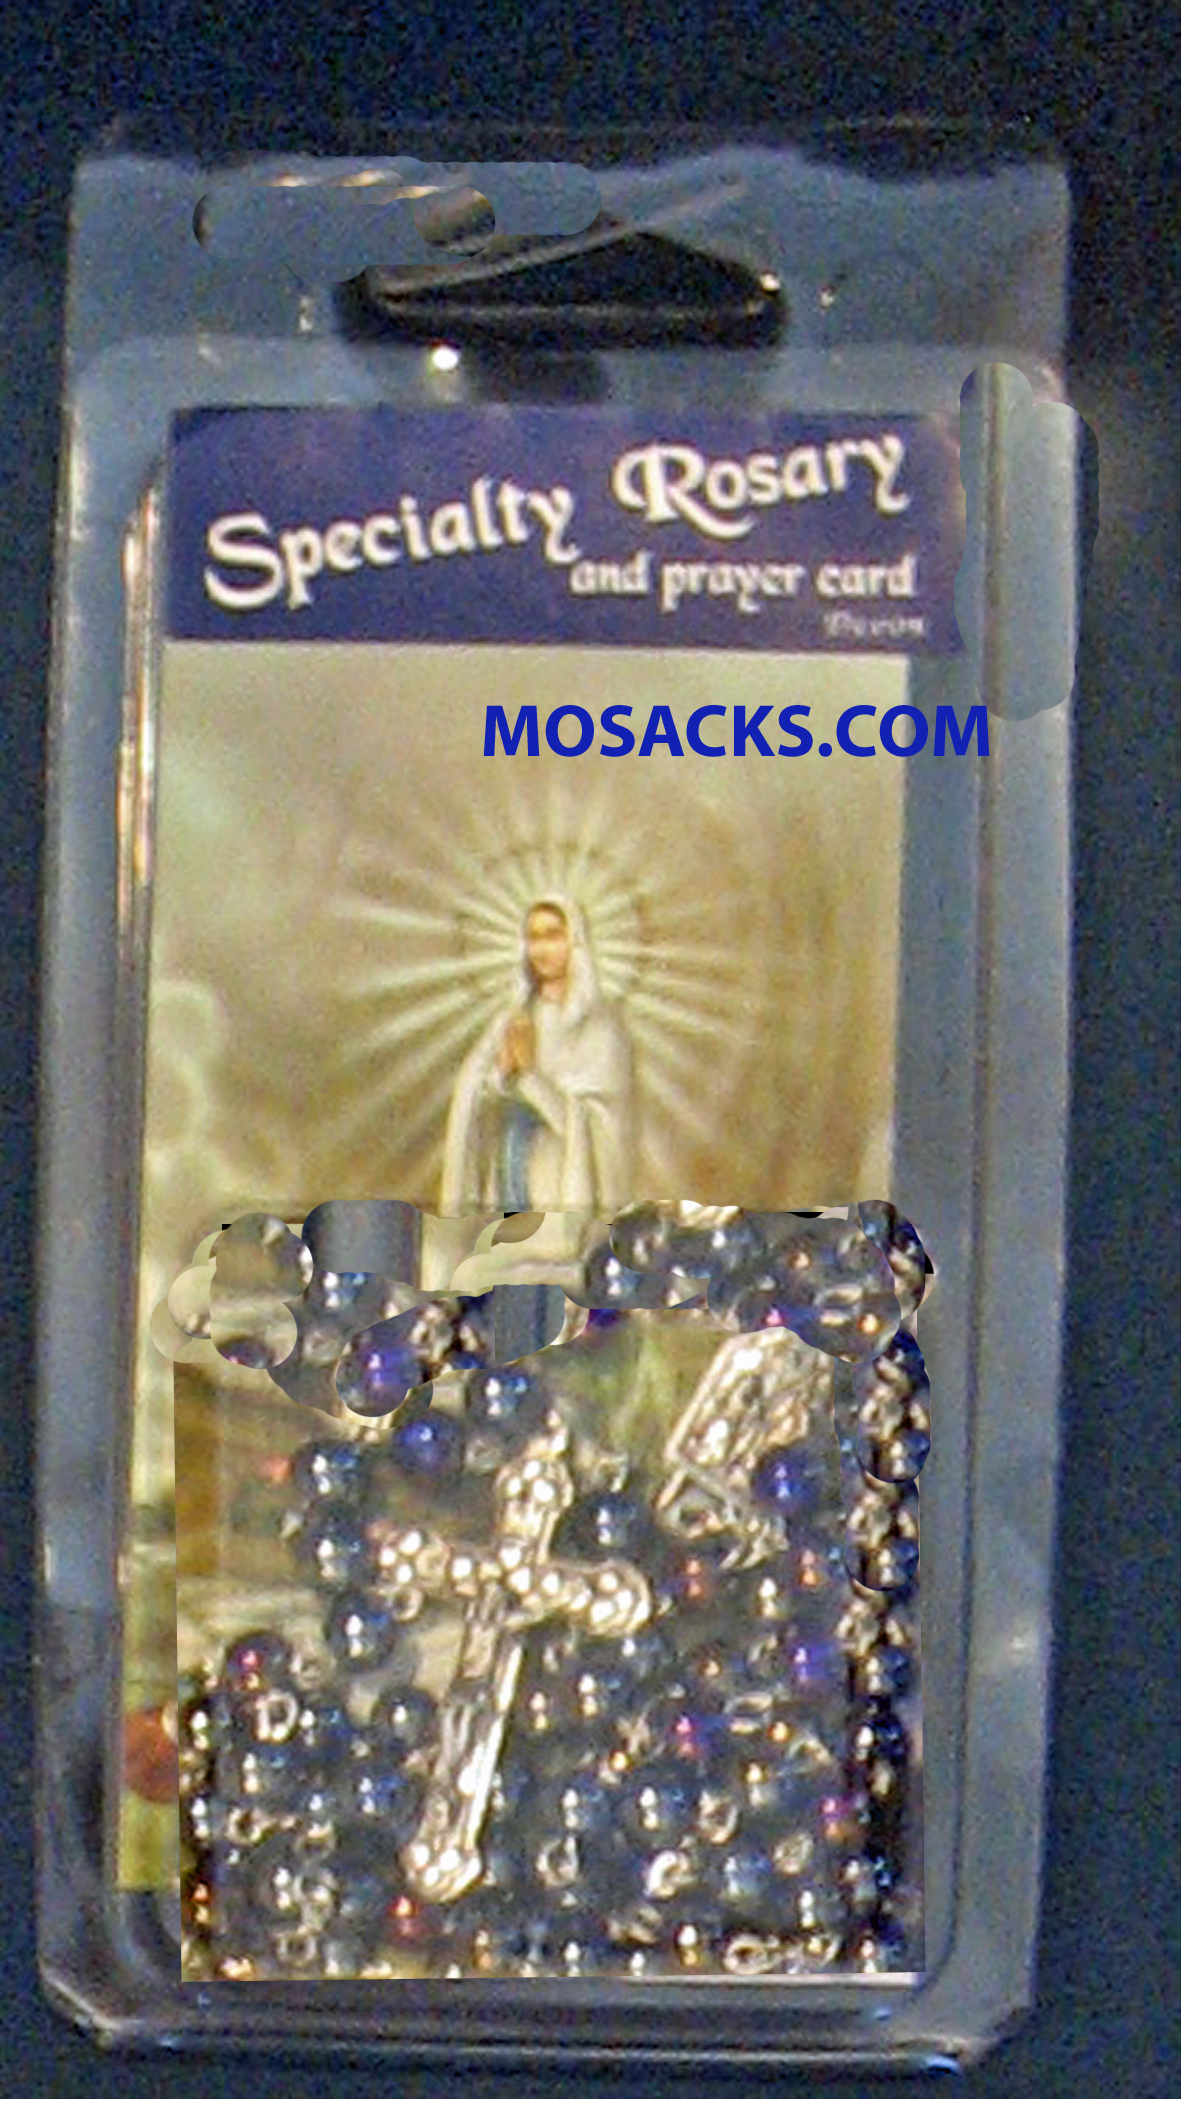 Specialty Rosary Our Lady Of Lourdes and Prayer Card